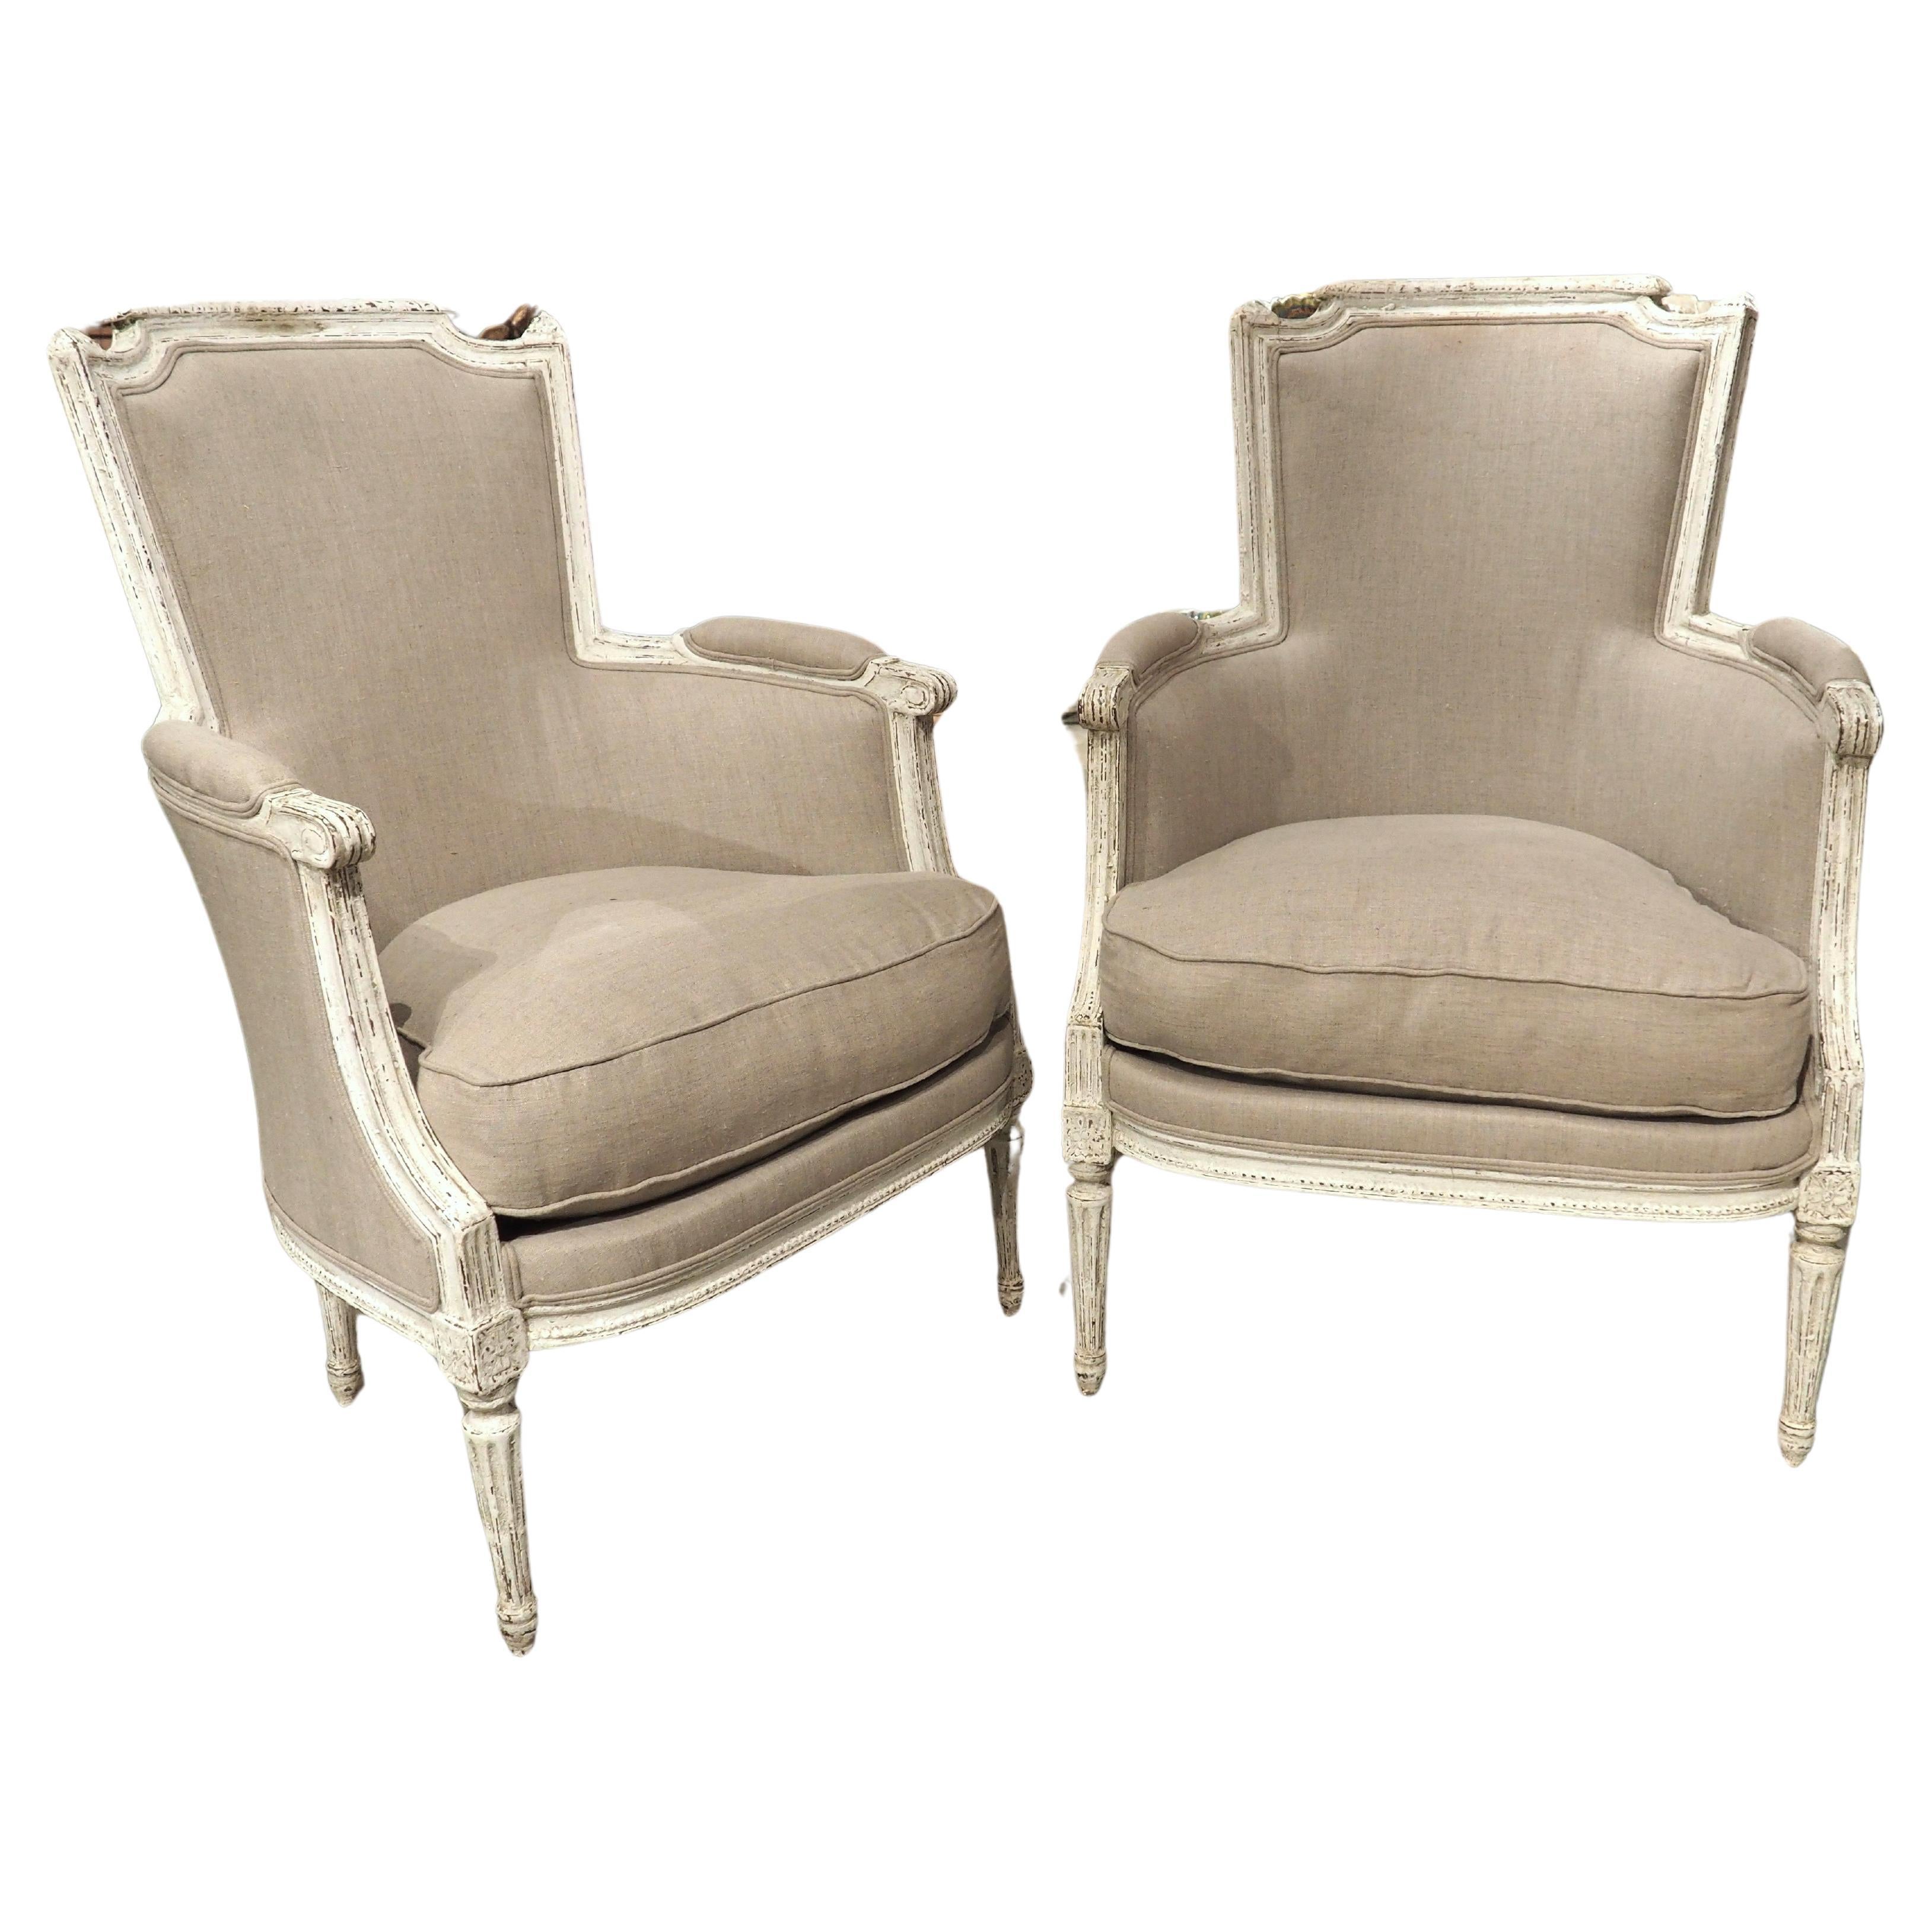 Pair of Antique French Painted Directoire Style Armchairs, Circa 1900 For Sale